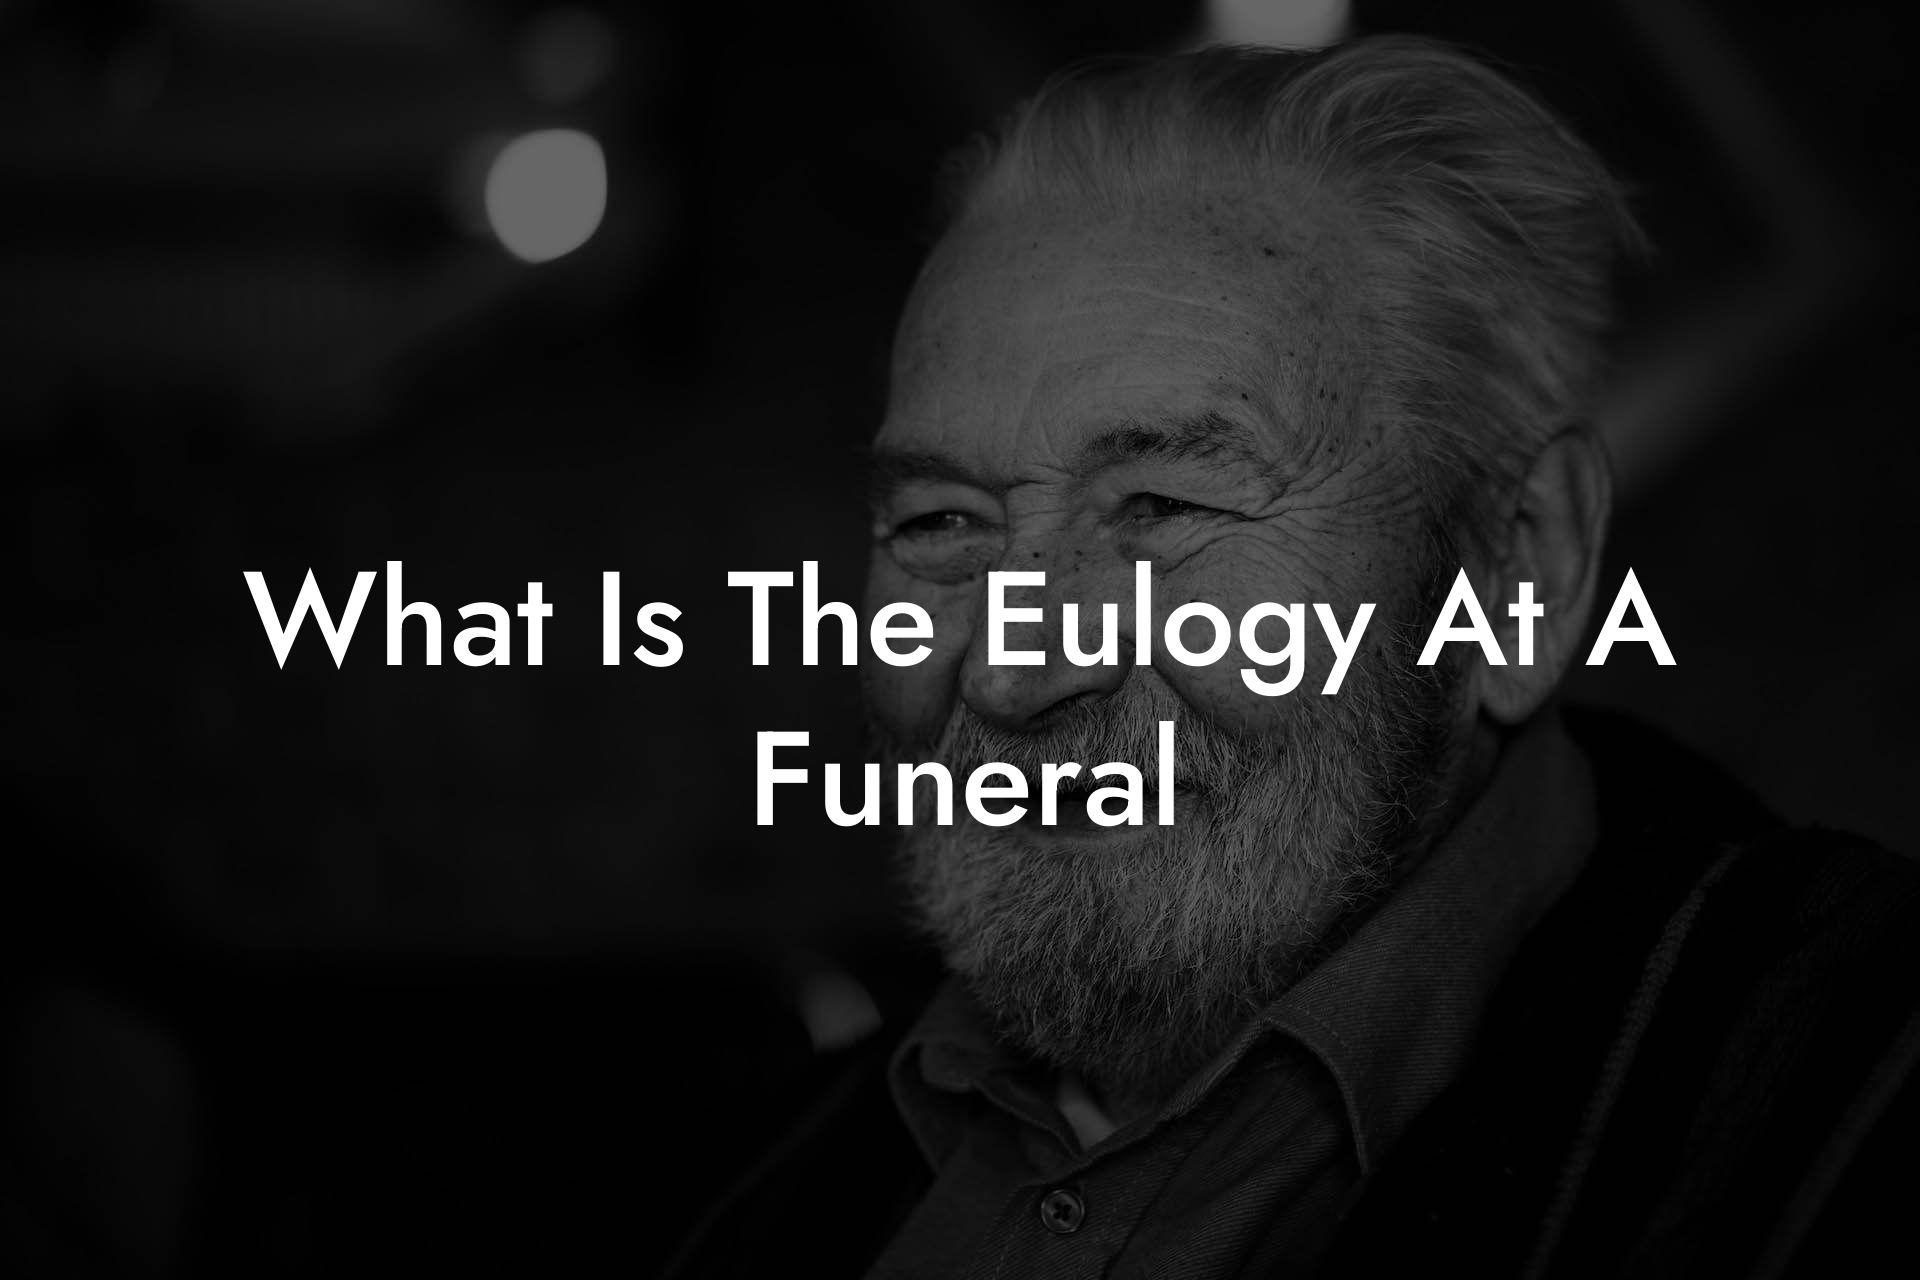 What Is The Eulogy At A Funeral